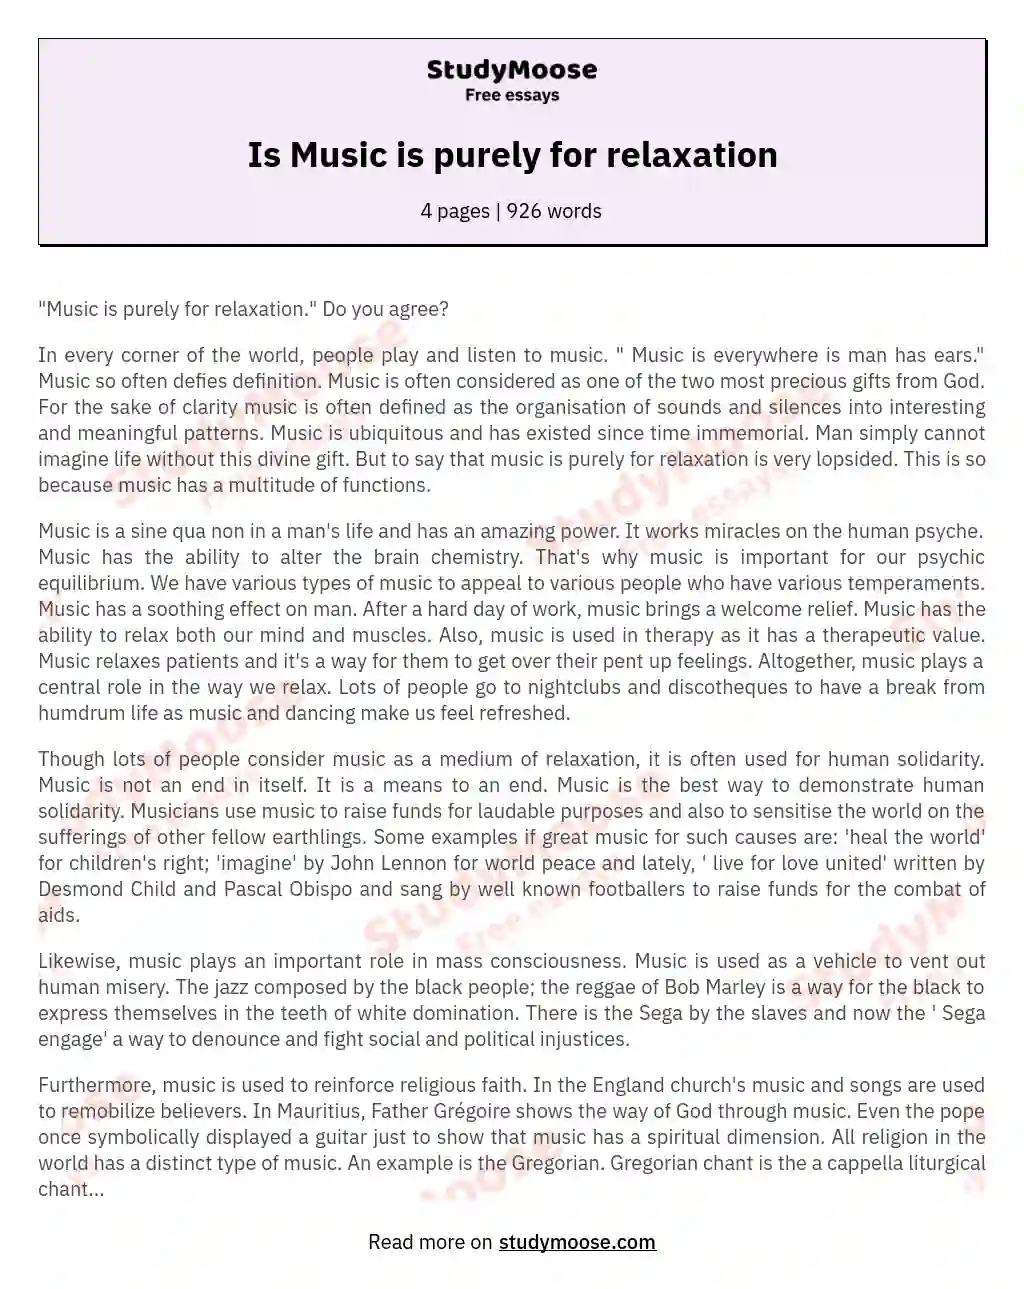 Is Music is purely for relaxation essay